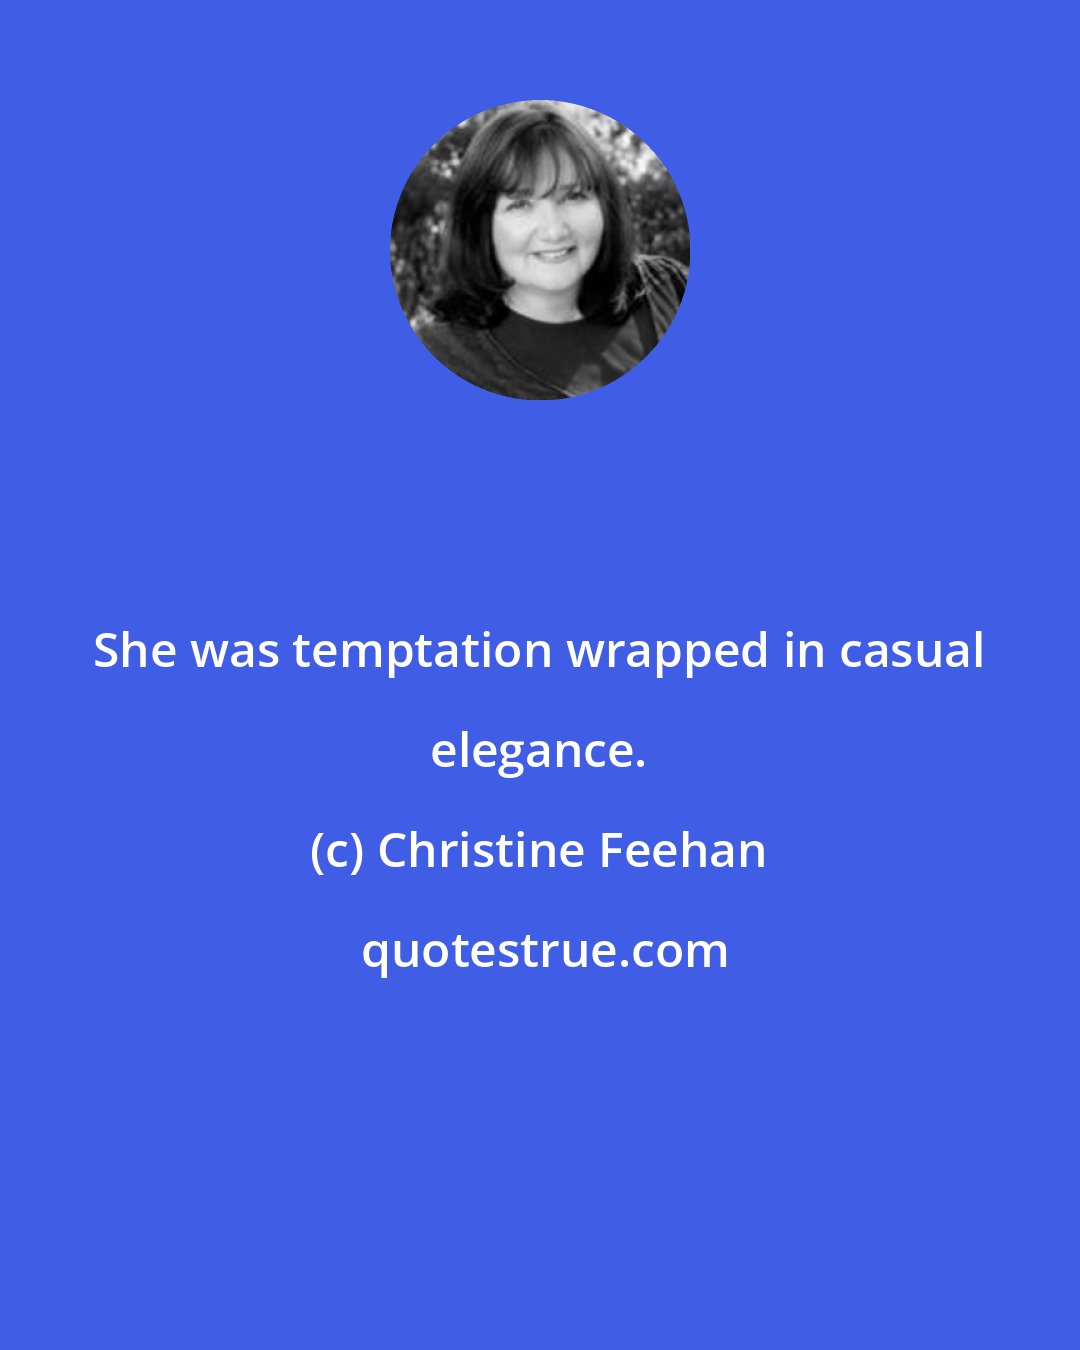 Christine Feehan: She was temptation wrapped in casual elegance.